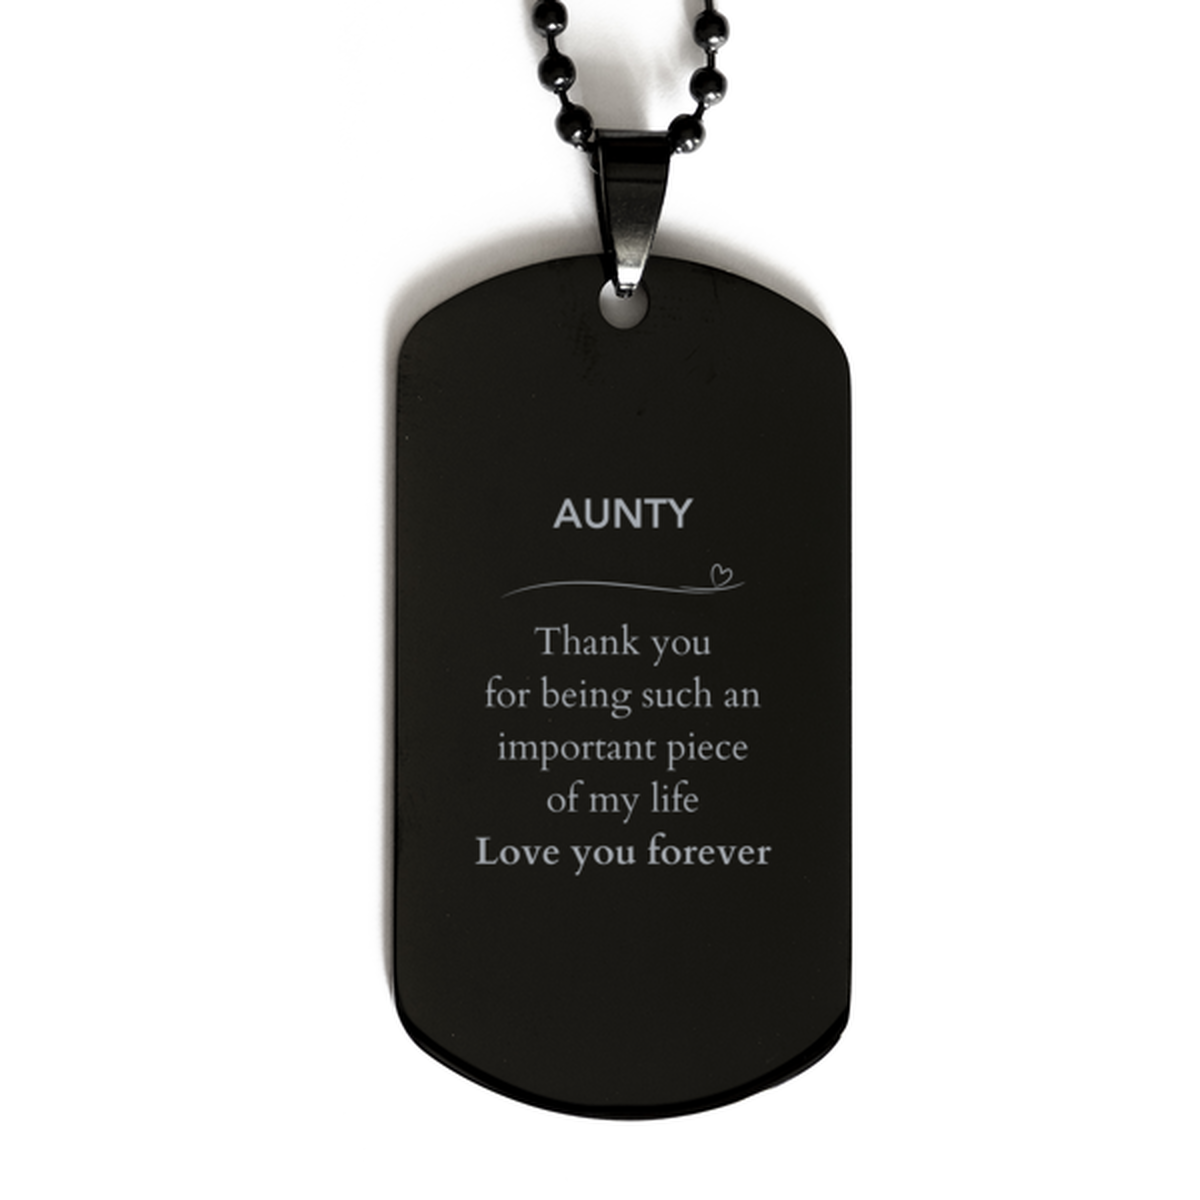 Appropriate Aunty Black Dog Tag Epic Birthday Gifts for Aunty Thank you for being such an important piece of my life Aunty Christmas Mothers Fathers Day